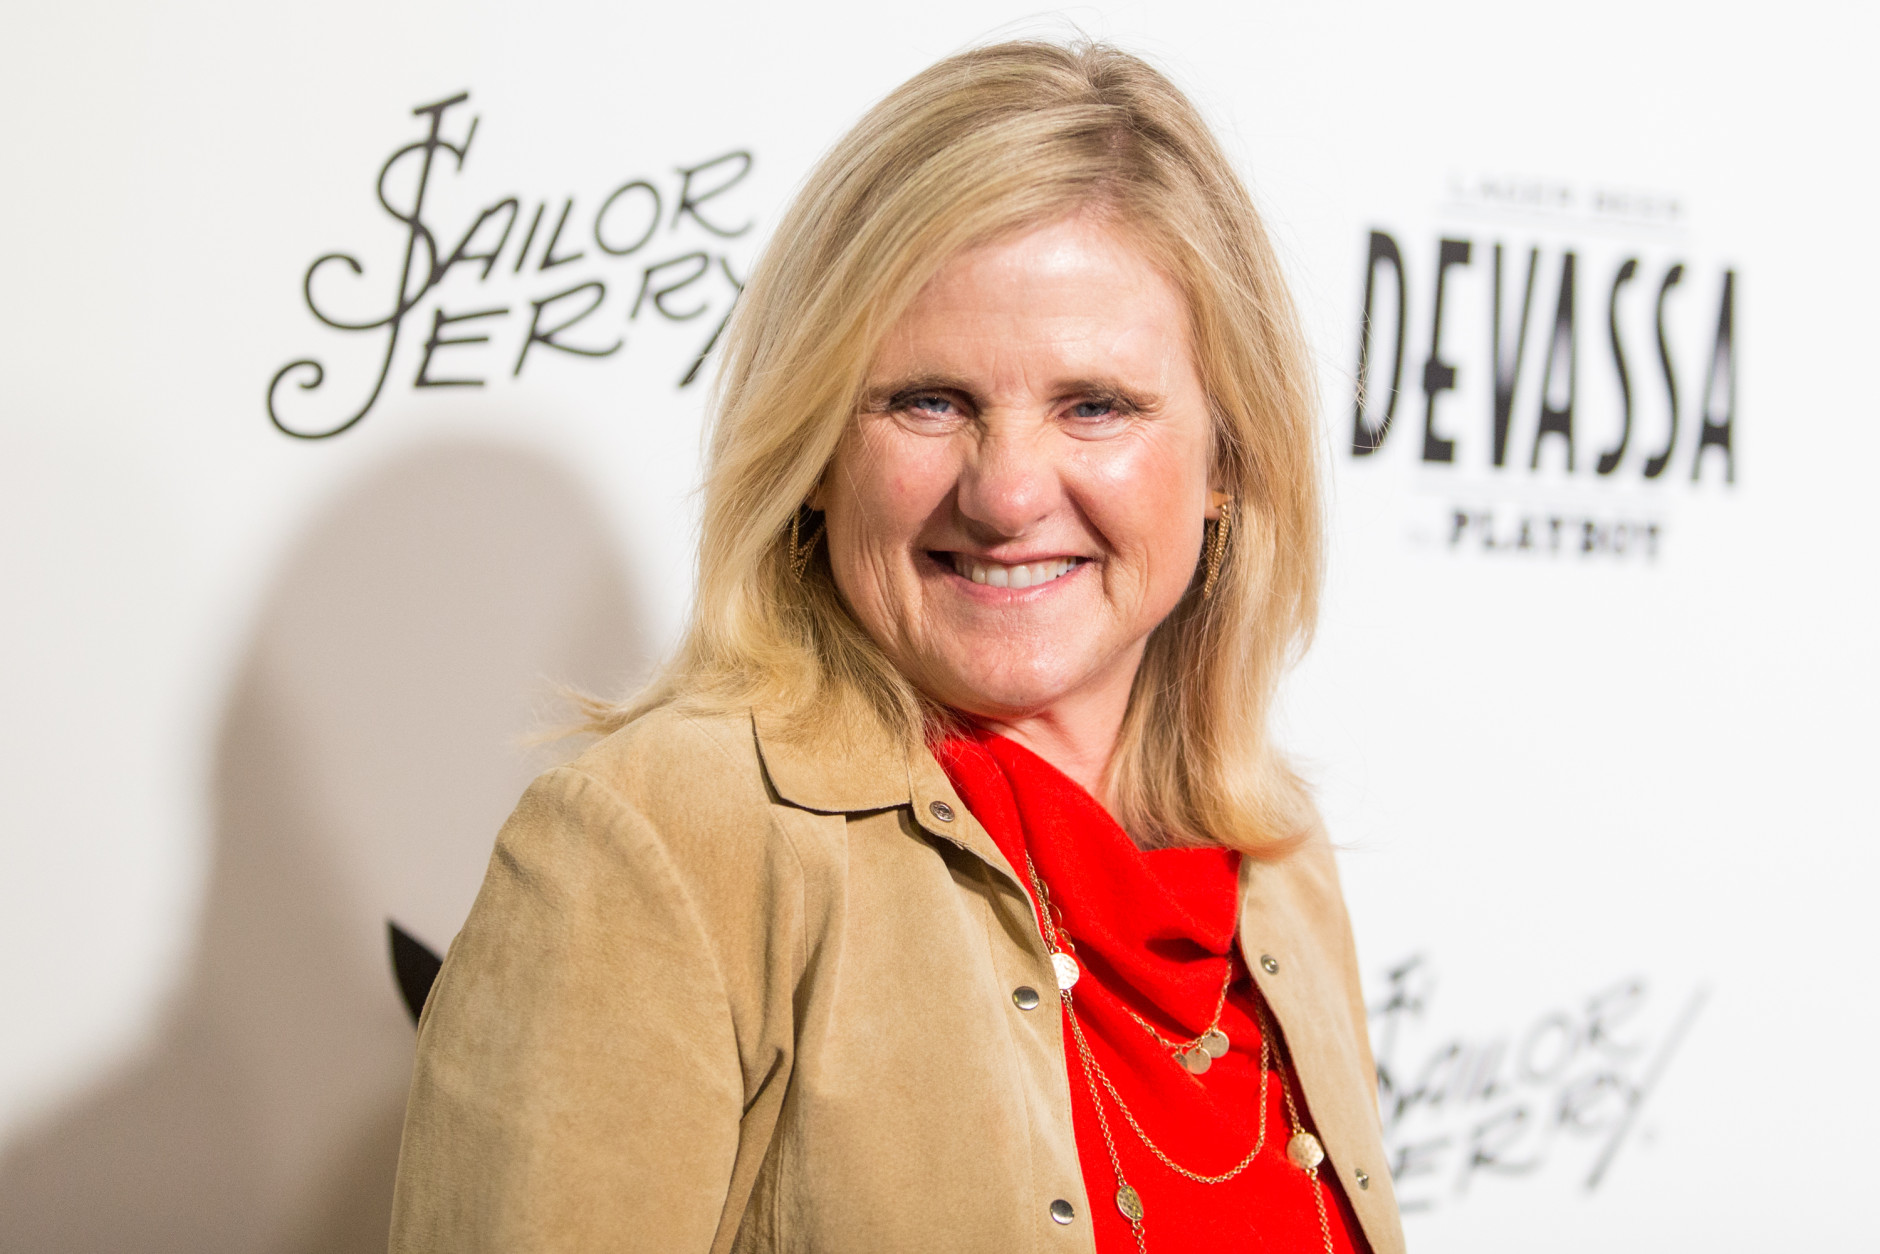 Nancy Cartwright attends the Playboy and Gramercy Pictures' Self/less party on day 2 of Comic-Con International on Friday, July 10, 2015, in San Diego. (Photo by Paul A. Hebert/Invision/AP)